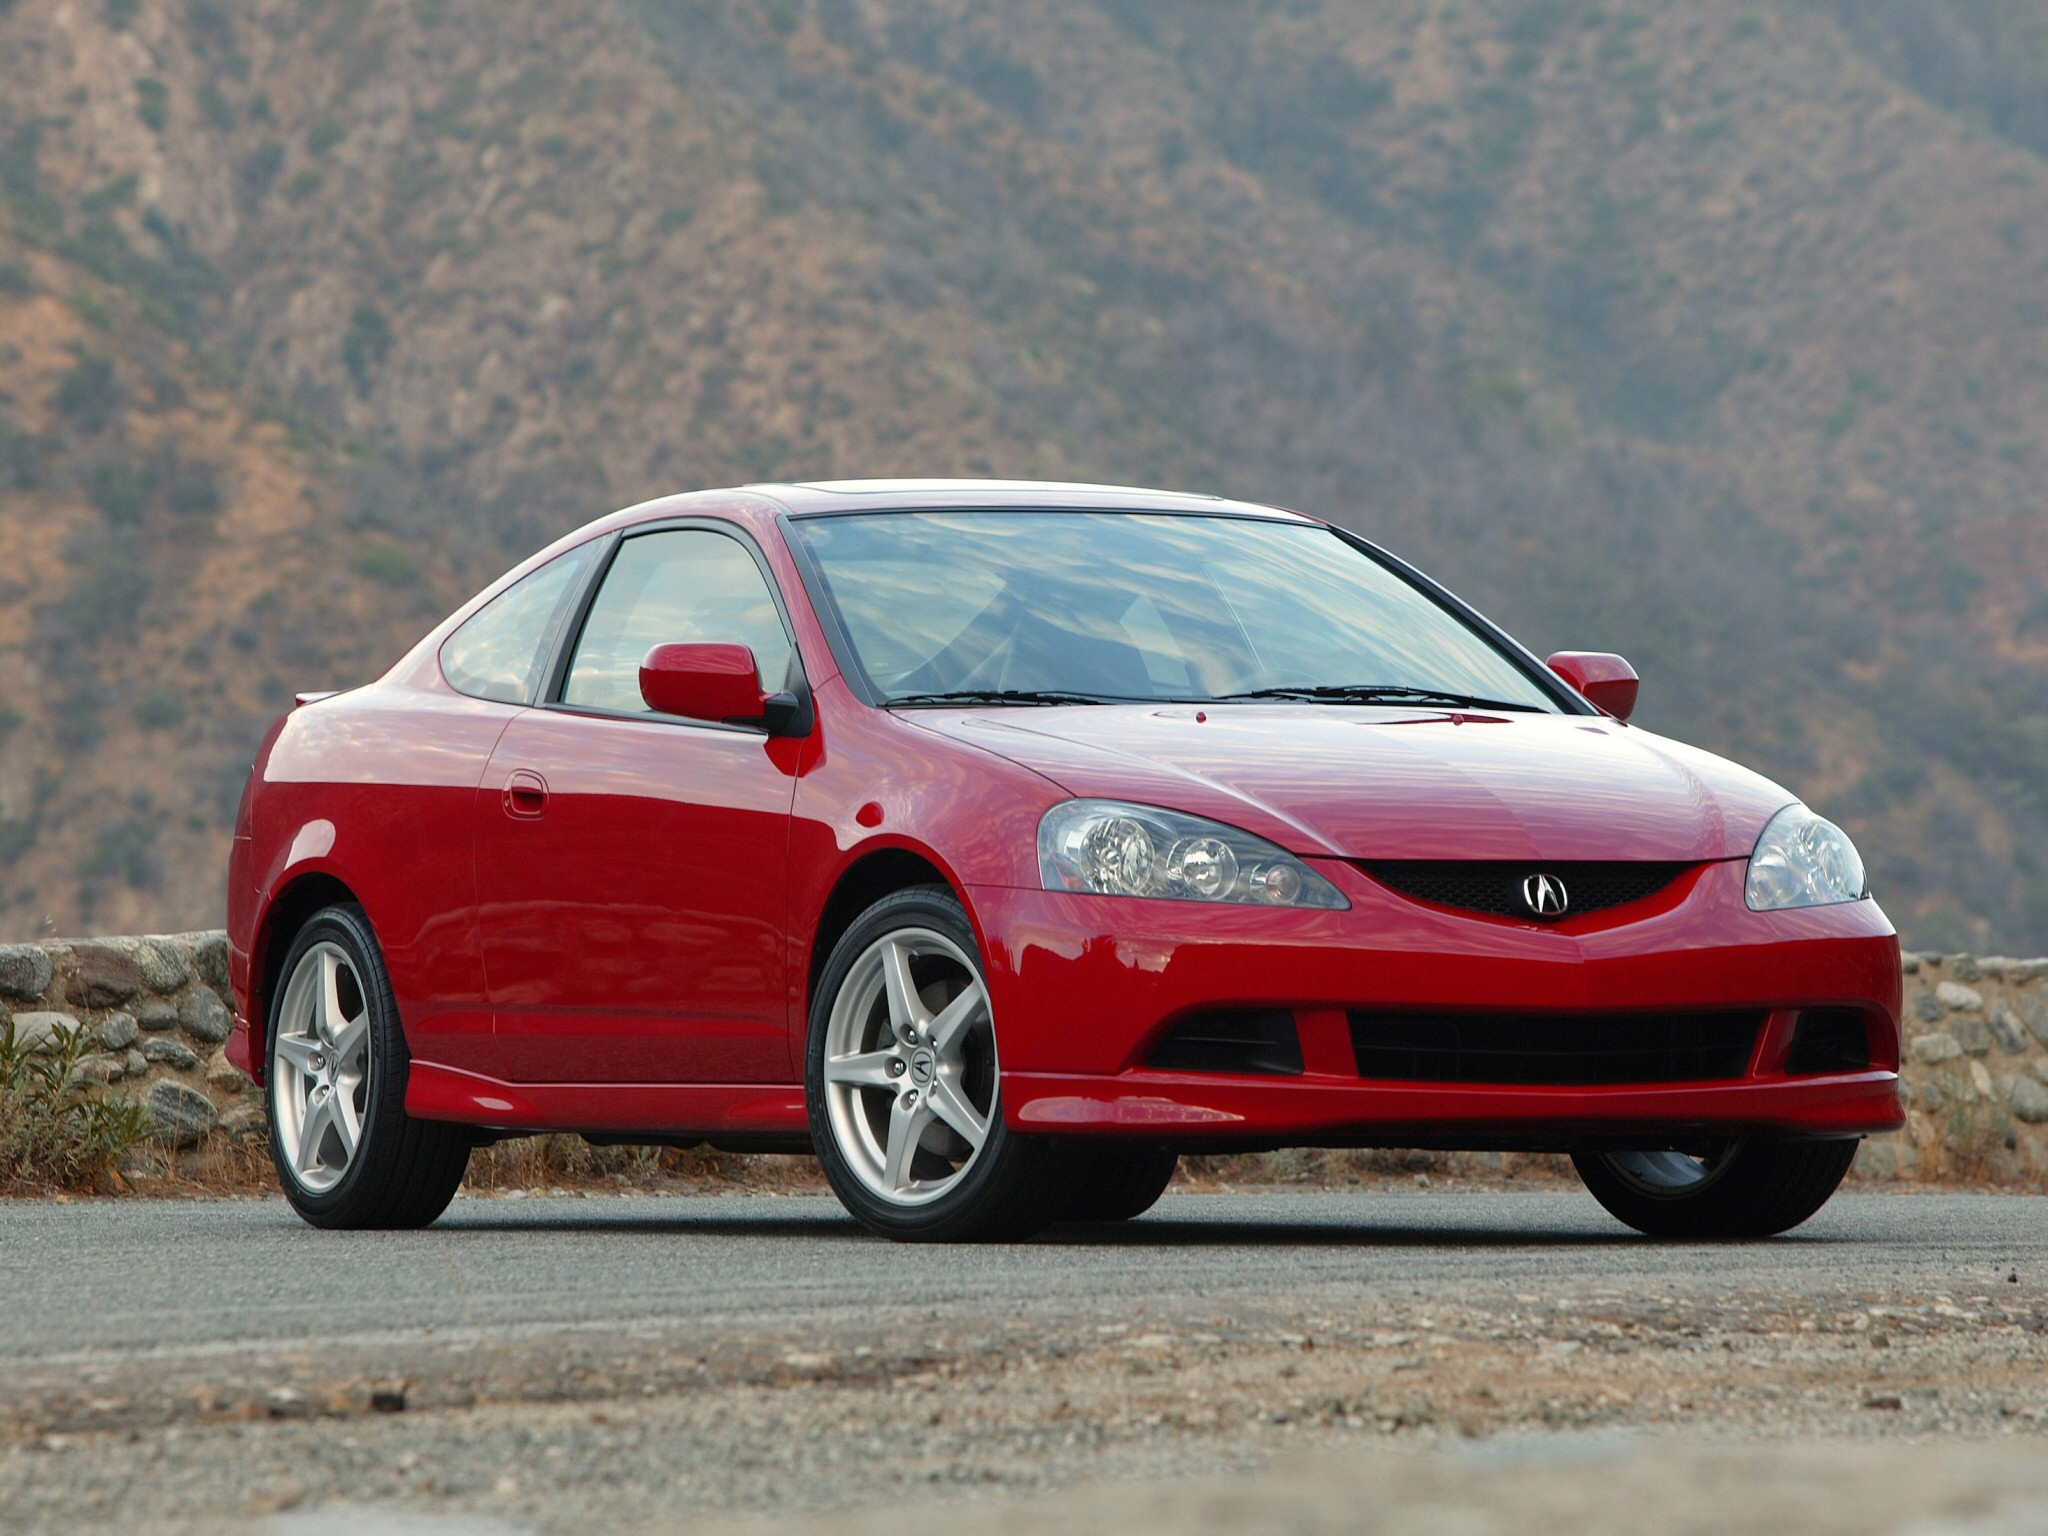 front view, auto, mountains, acura, cars, red, asphalt, style, rsx, 2005, akura